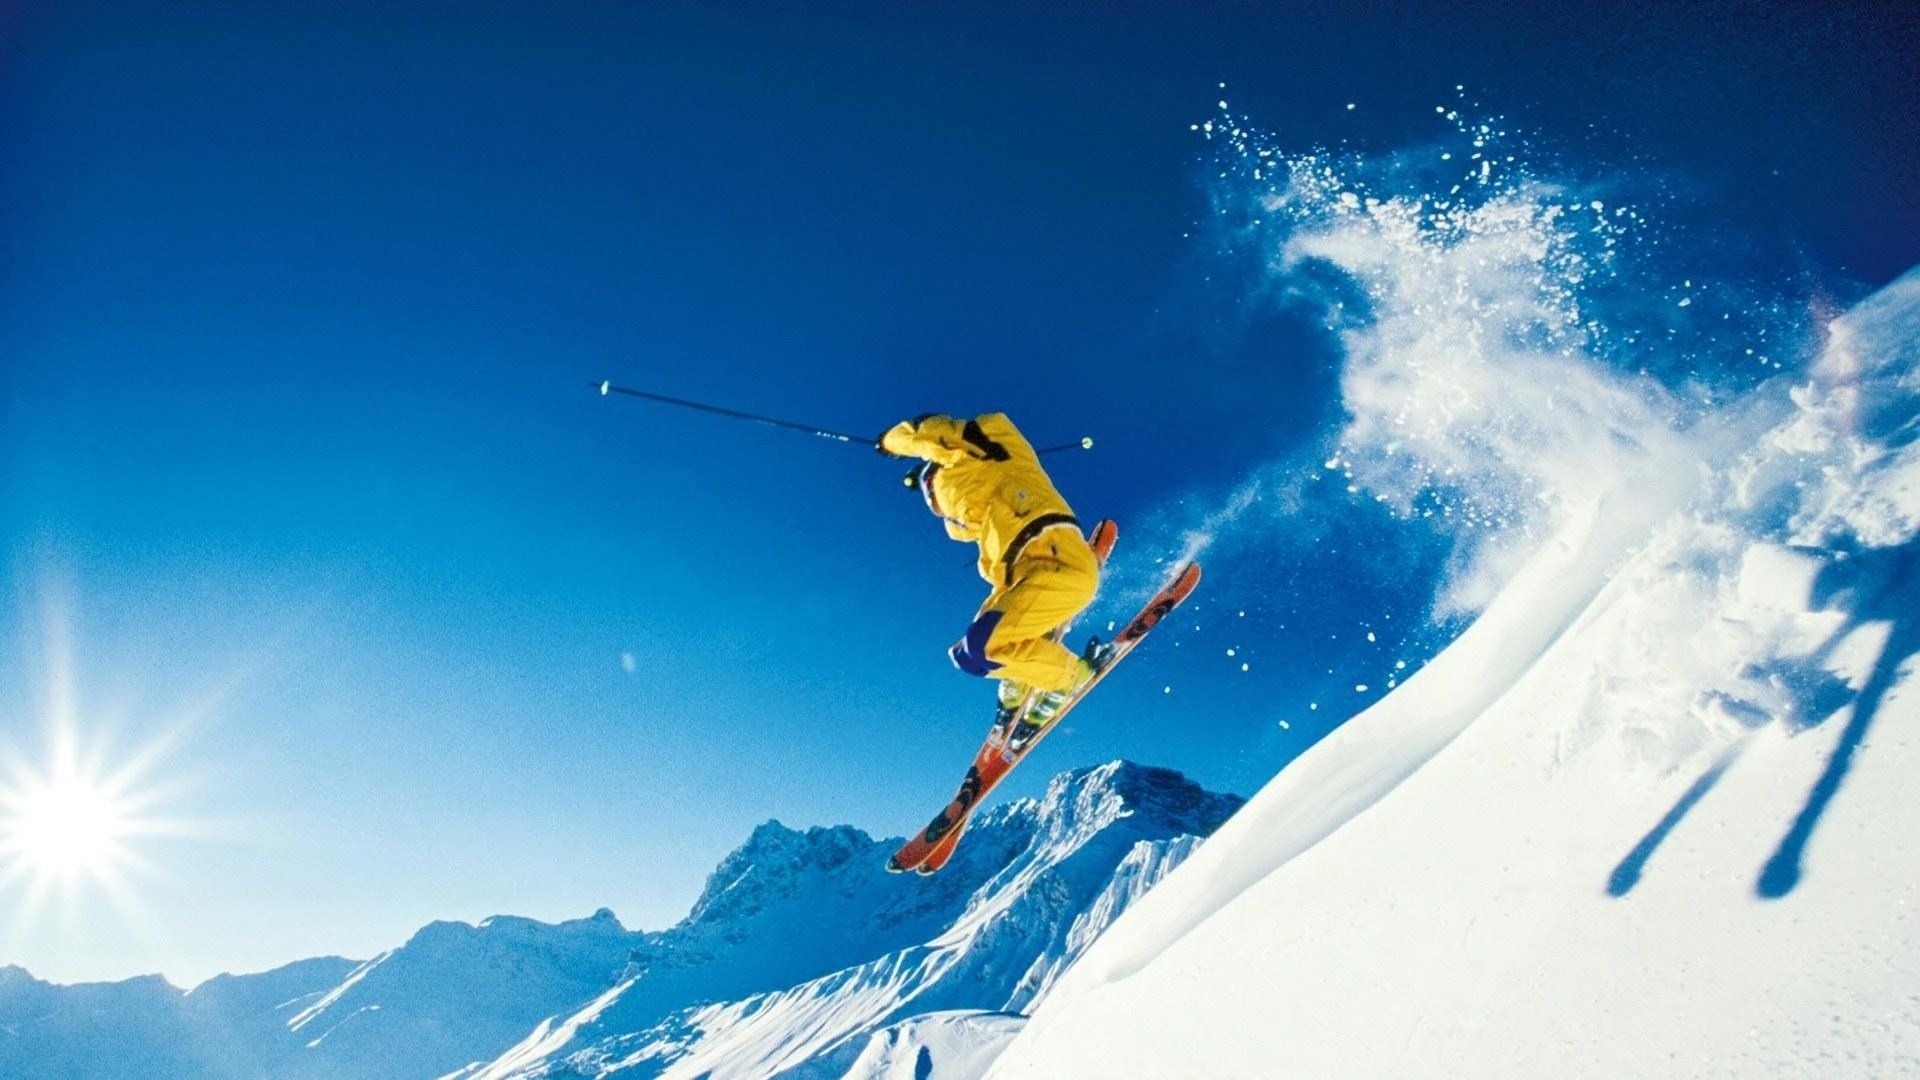 Alpine Skiing: Extreme sports, Cyclic winter sports, Passing the distance on a snow track. 1920x1080 Full HD Background.